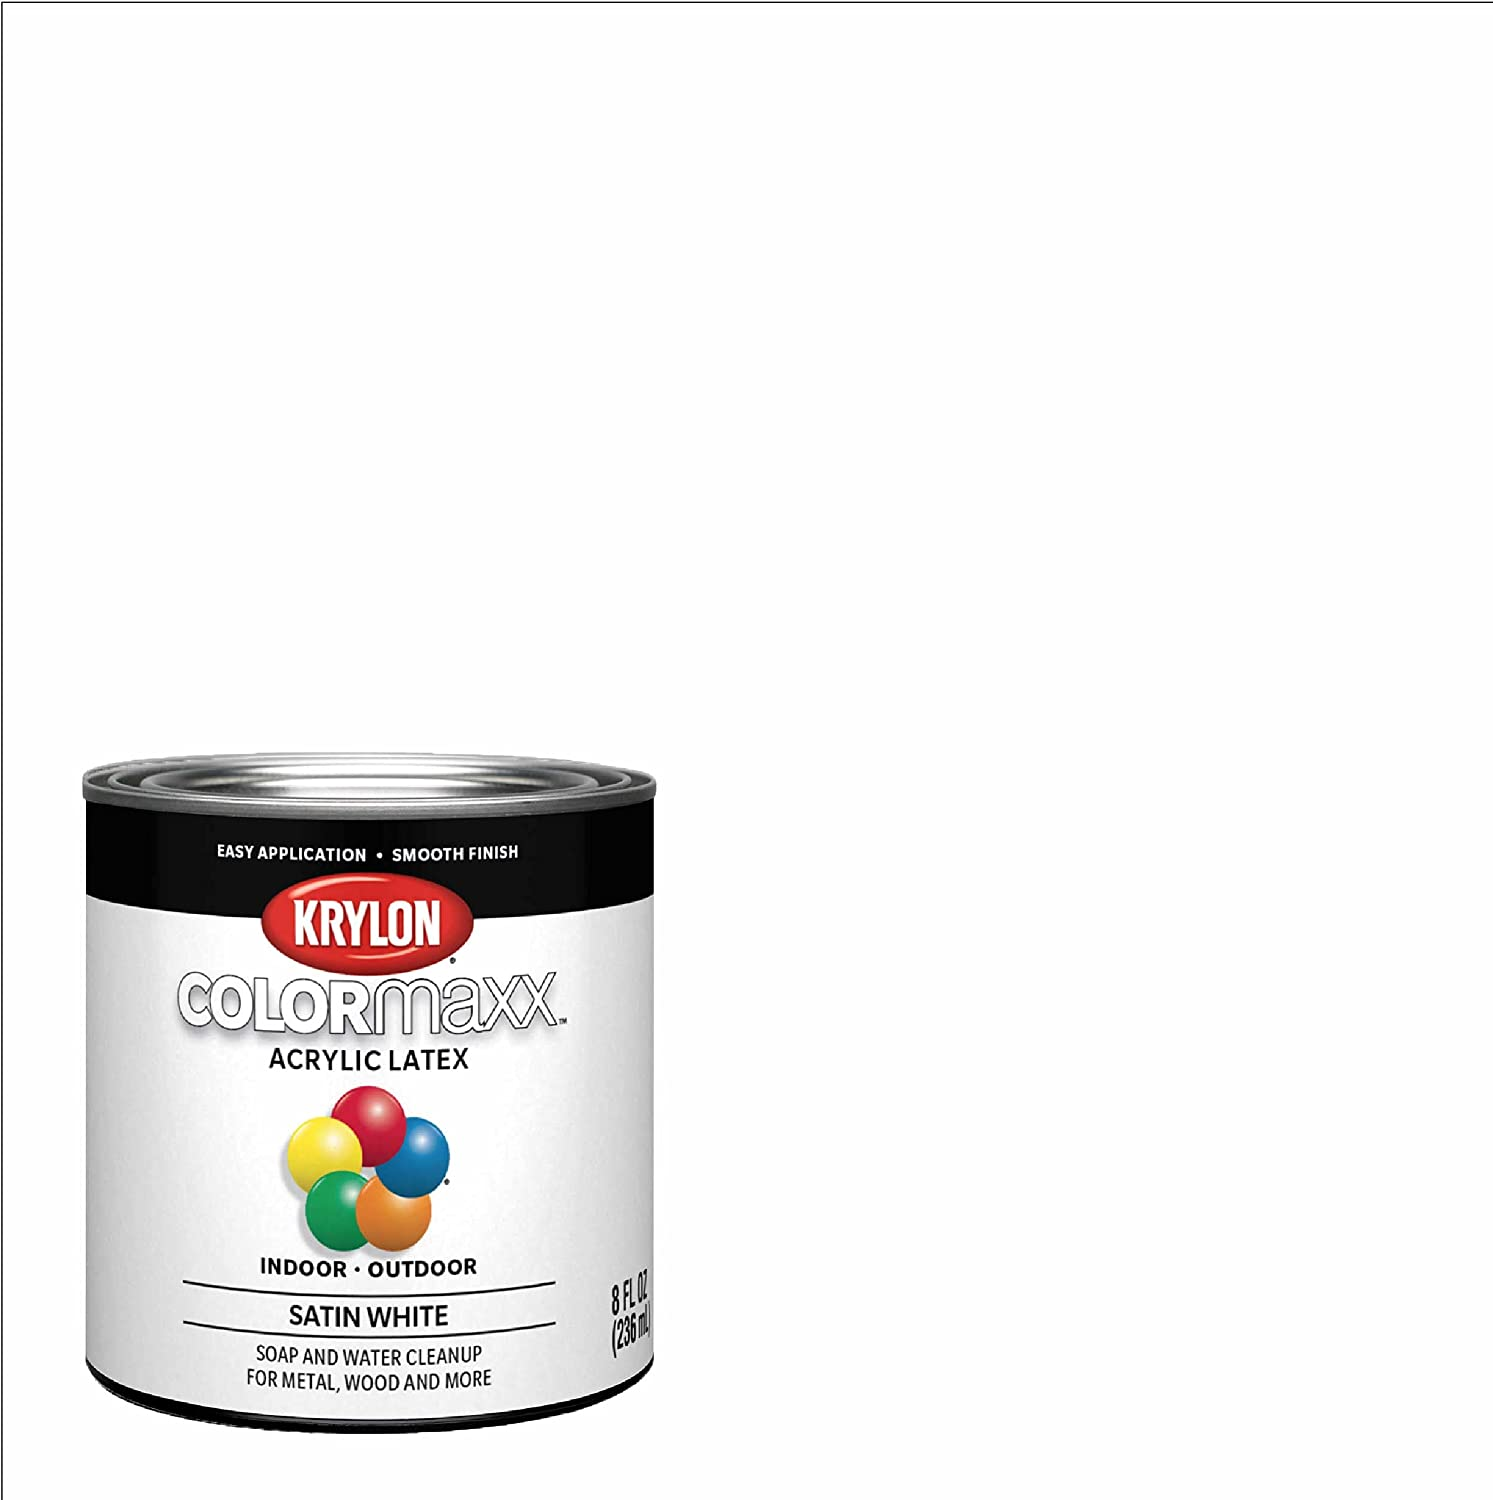 Krylon K05605007 COLORmaxx Acrylic Latex Brush On Paint for Indoor/Outdoor  Use, 8 Fl Oz (Pack of 1), Black